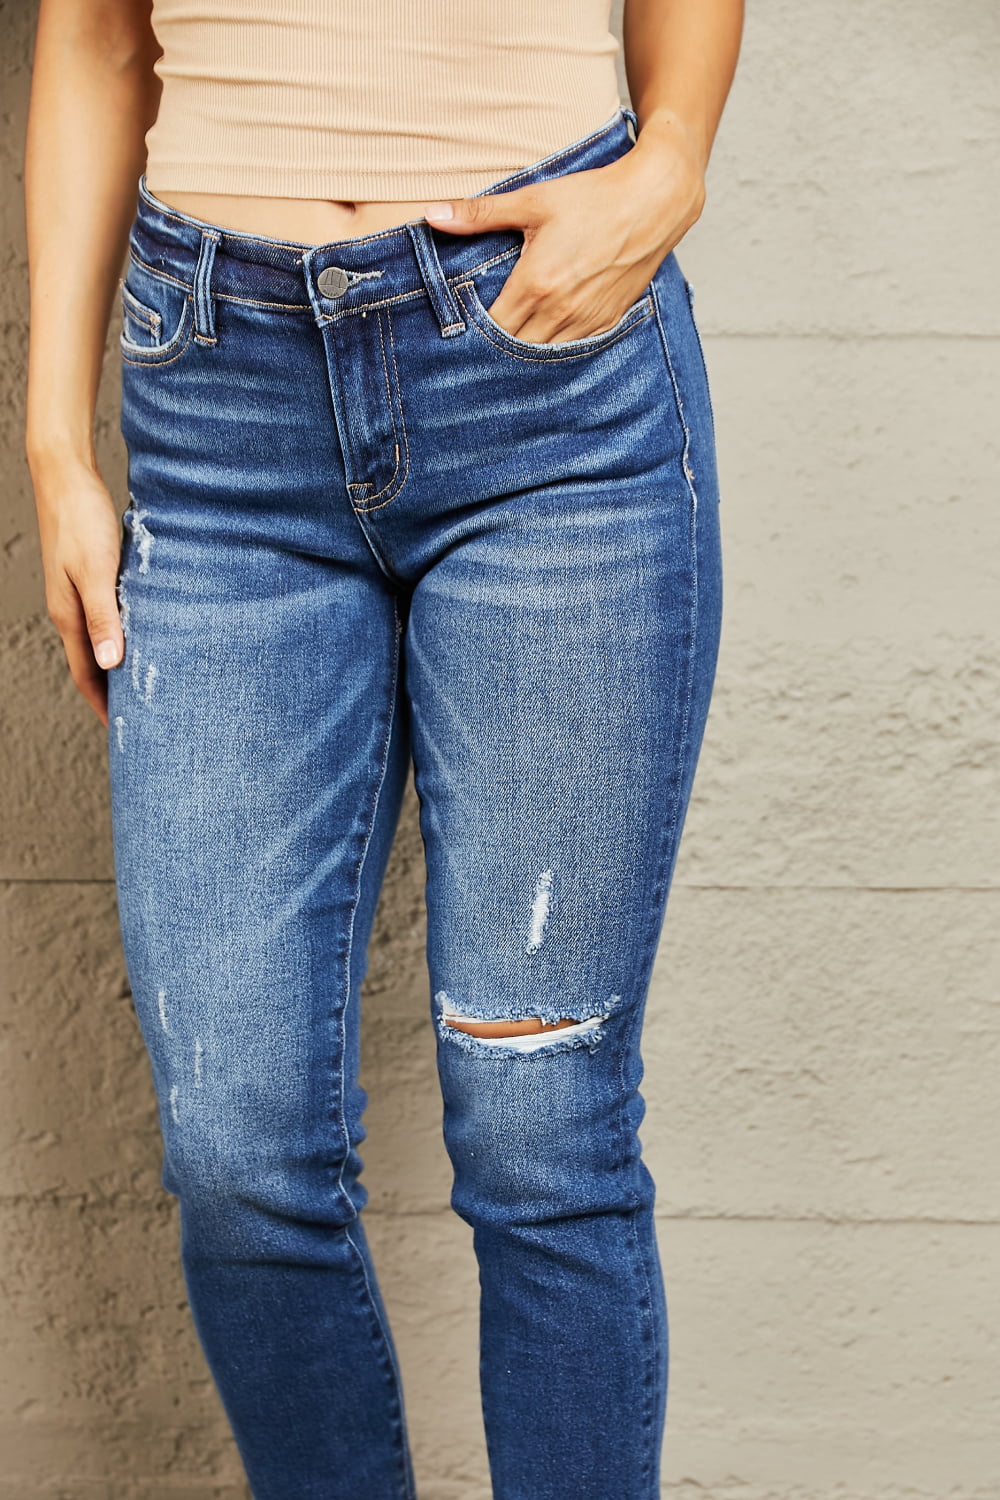 BAYEAS Mid Rise Distressed Slim Jeans Print on any thing USA/STOD clothes